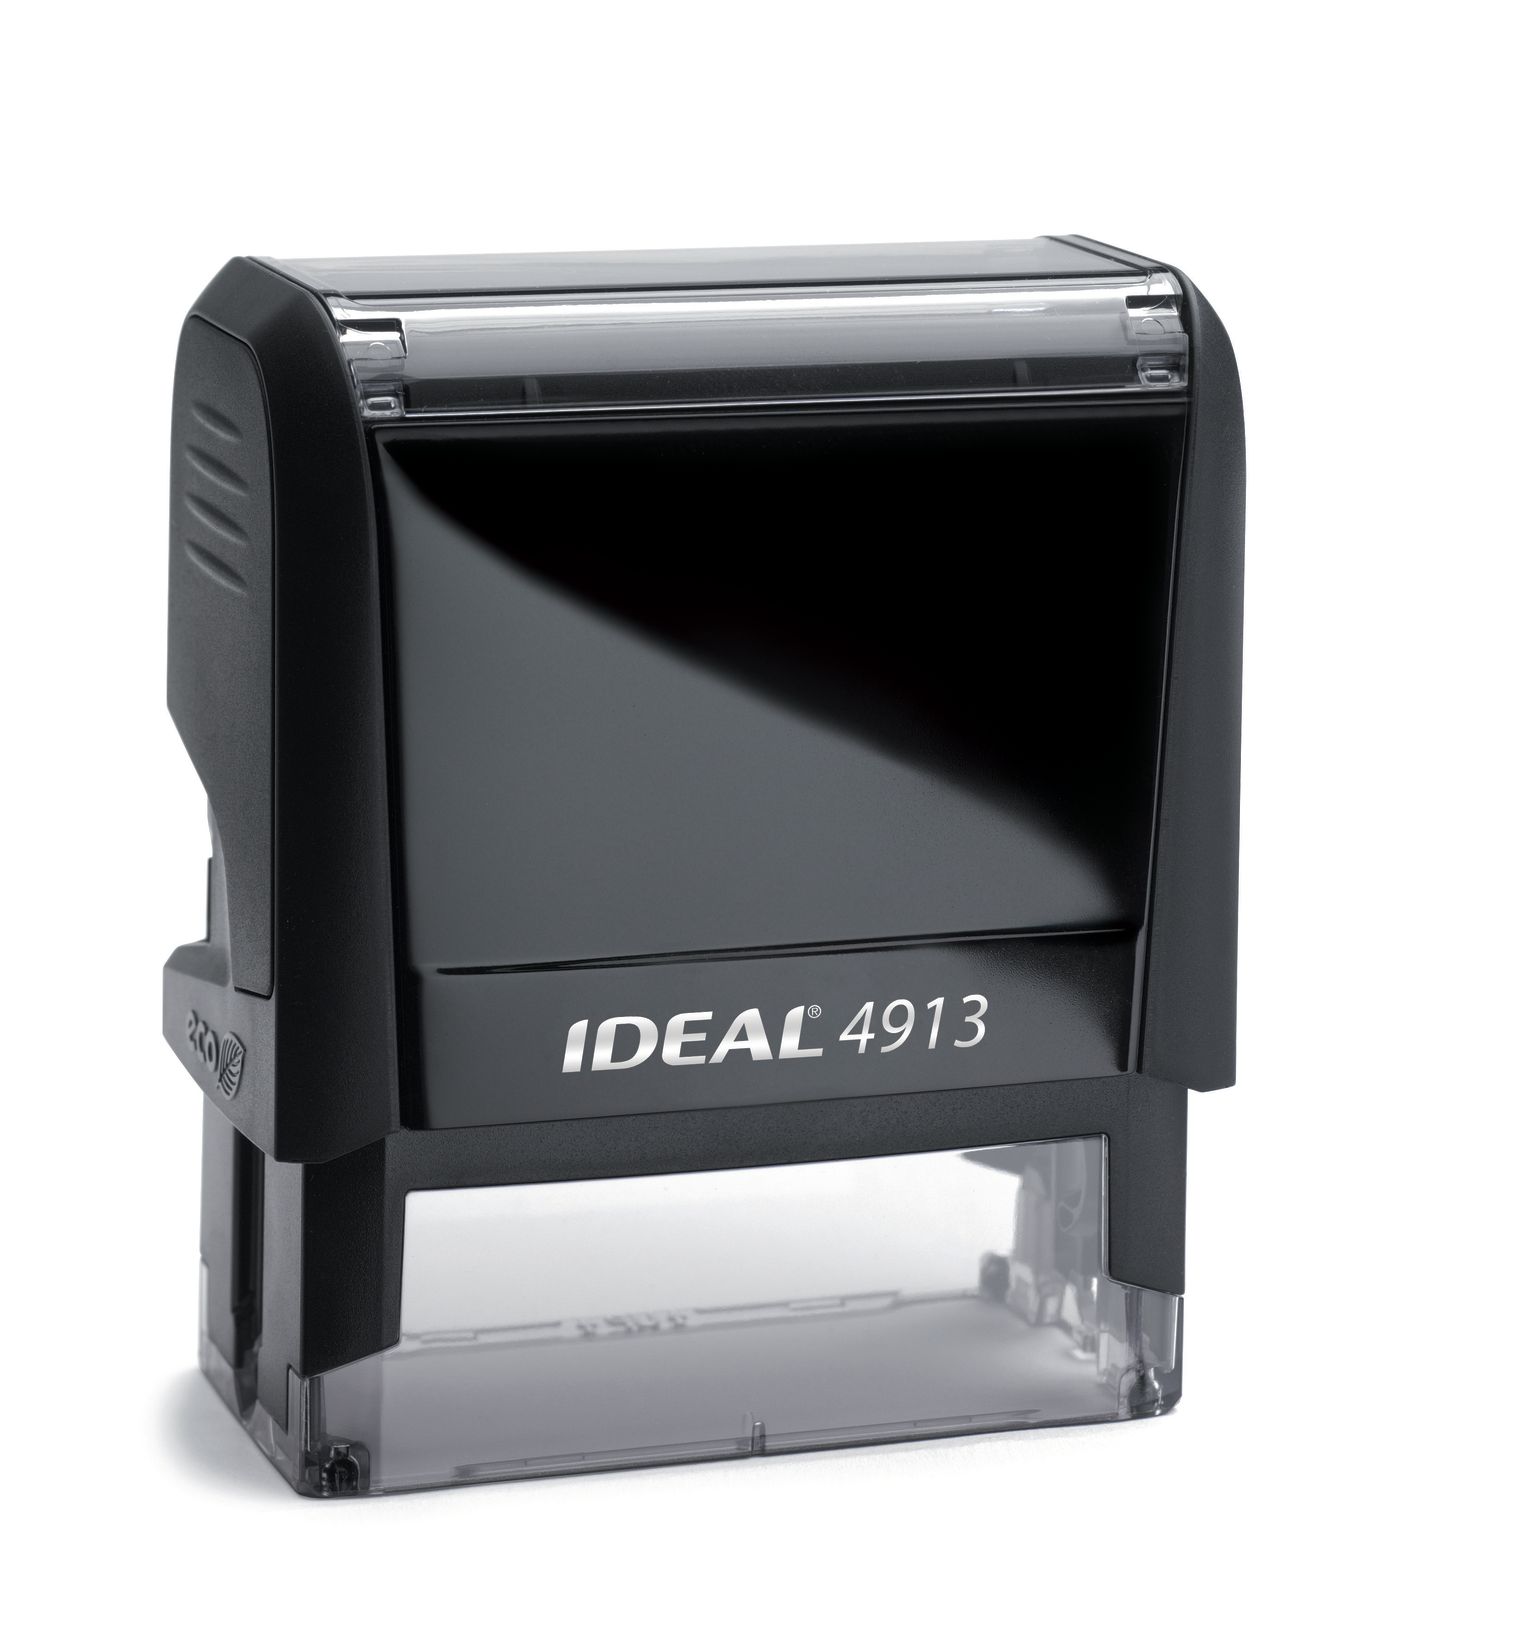 Ideal 4913 Self Inking Stamp